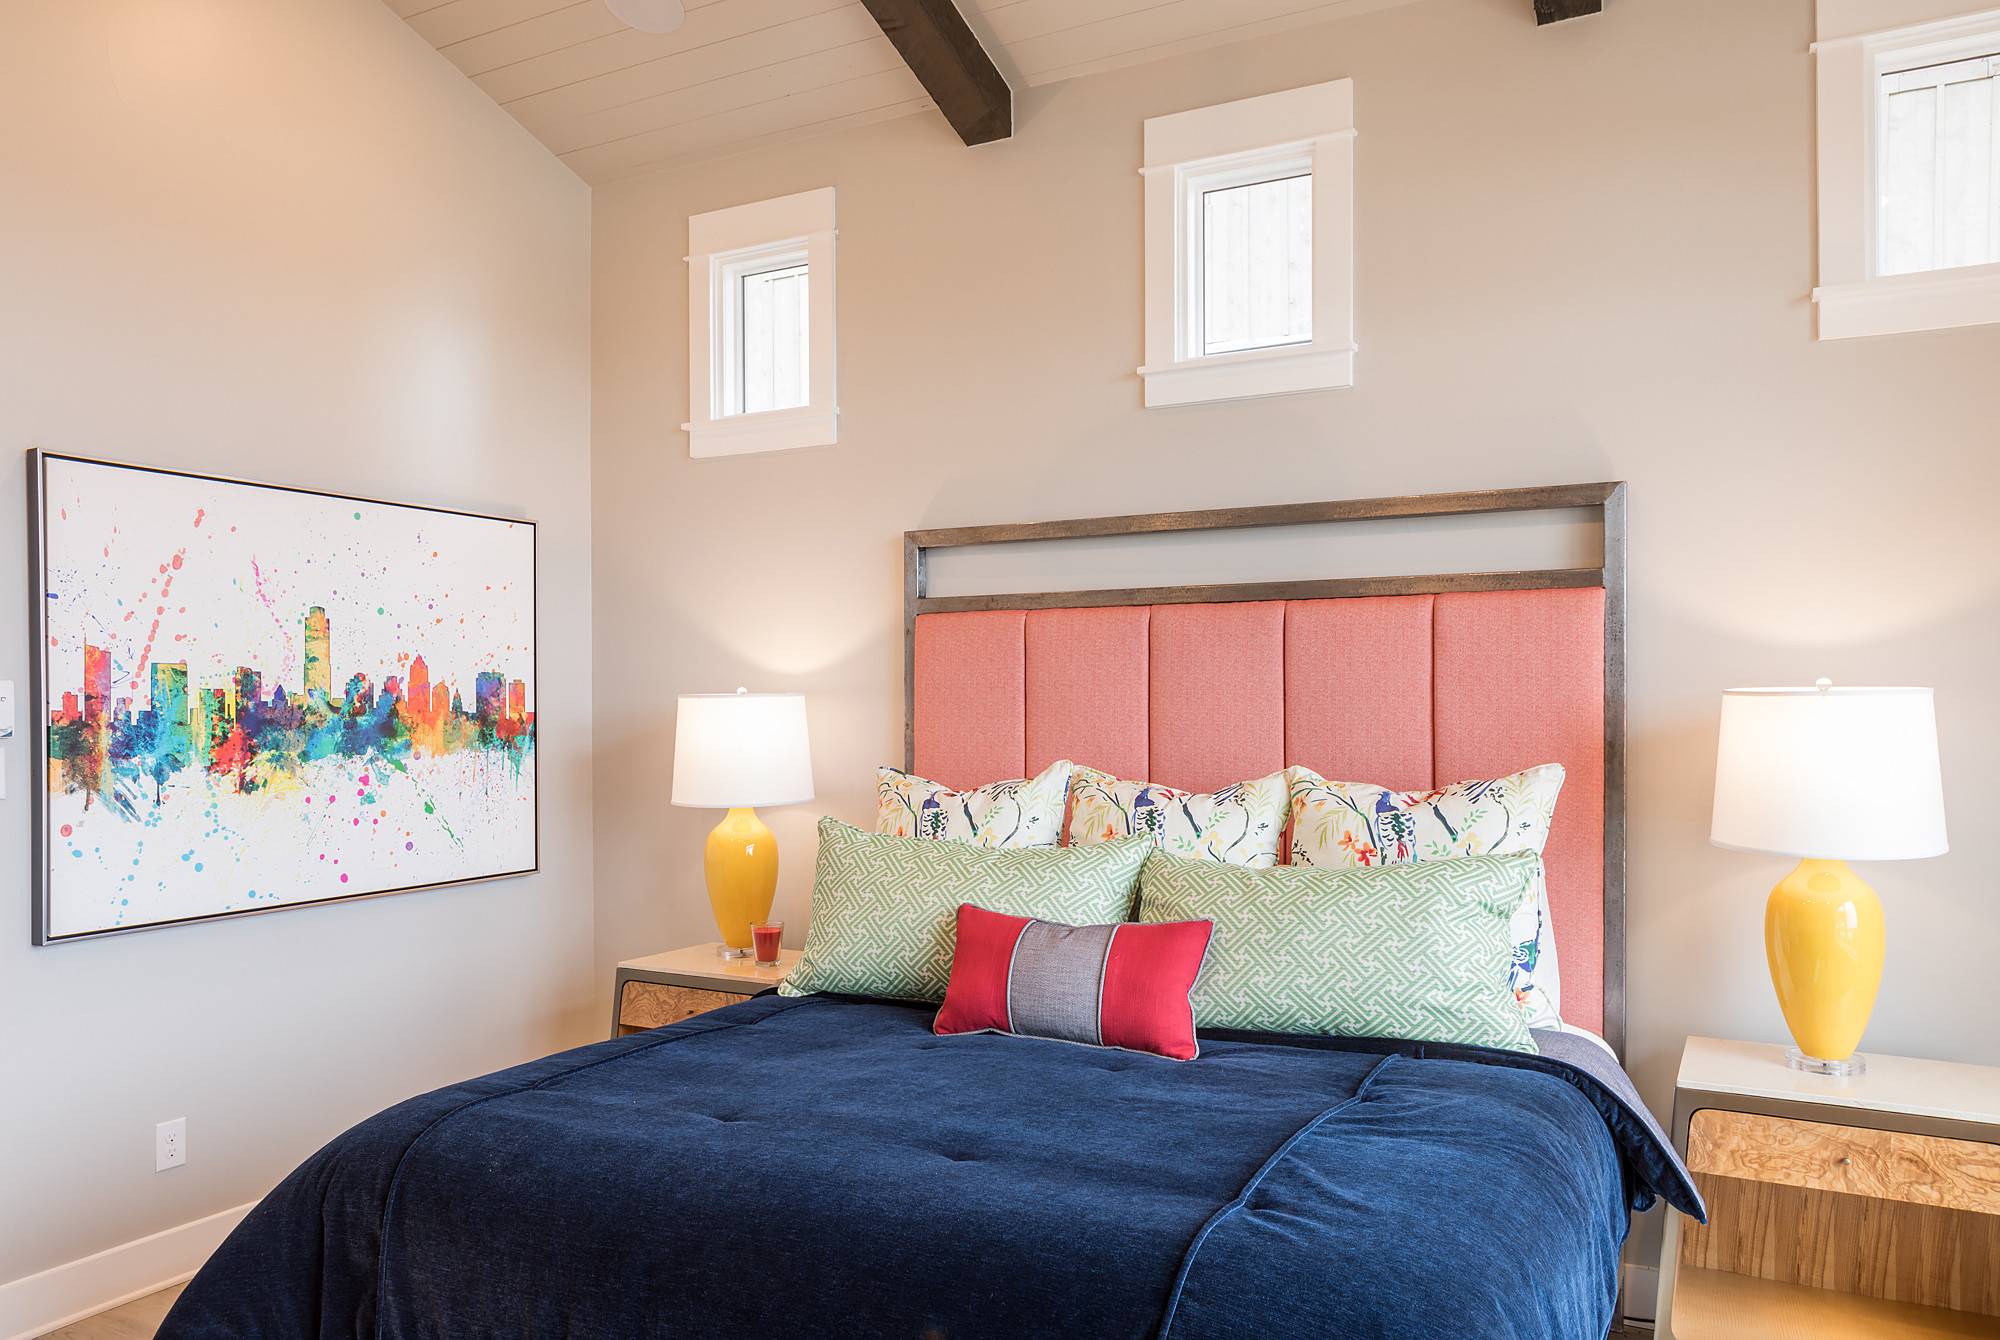 Coral headboard upholstery for a gorgeous statement (from Houzz)